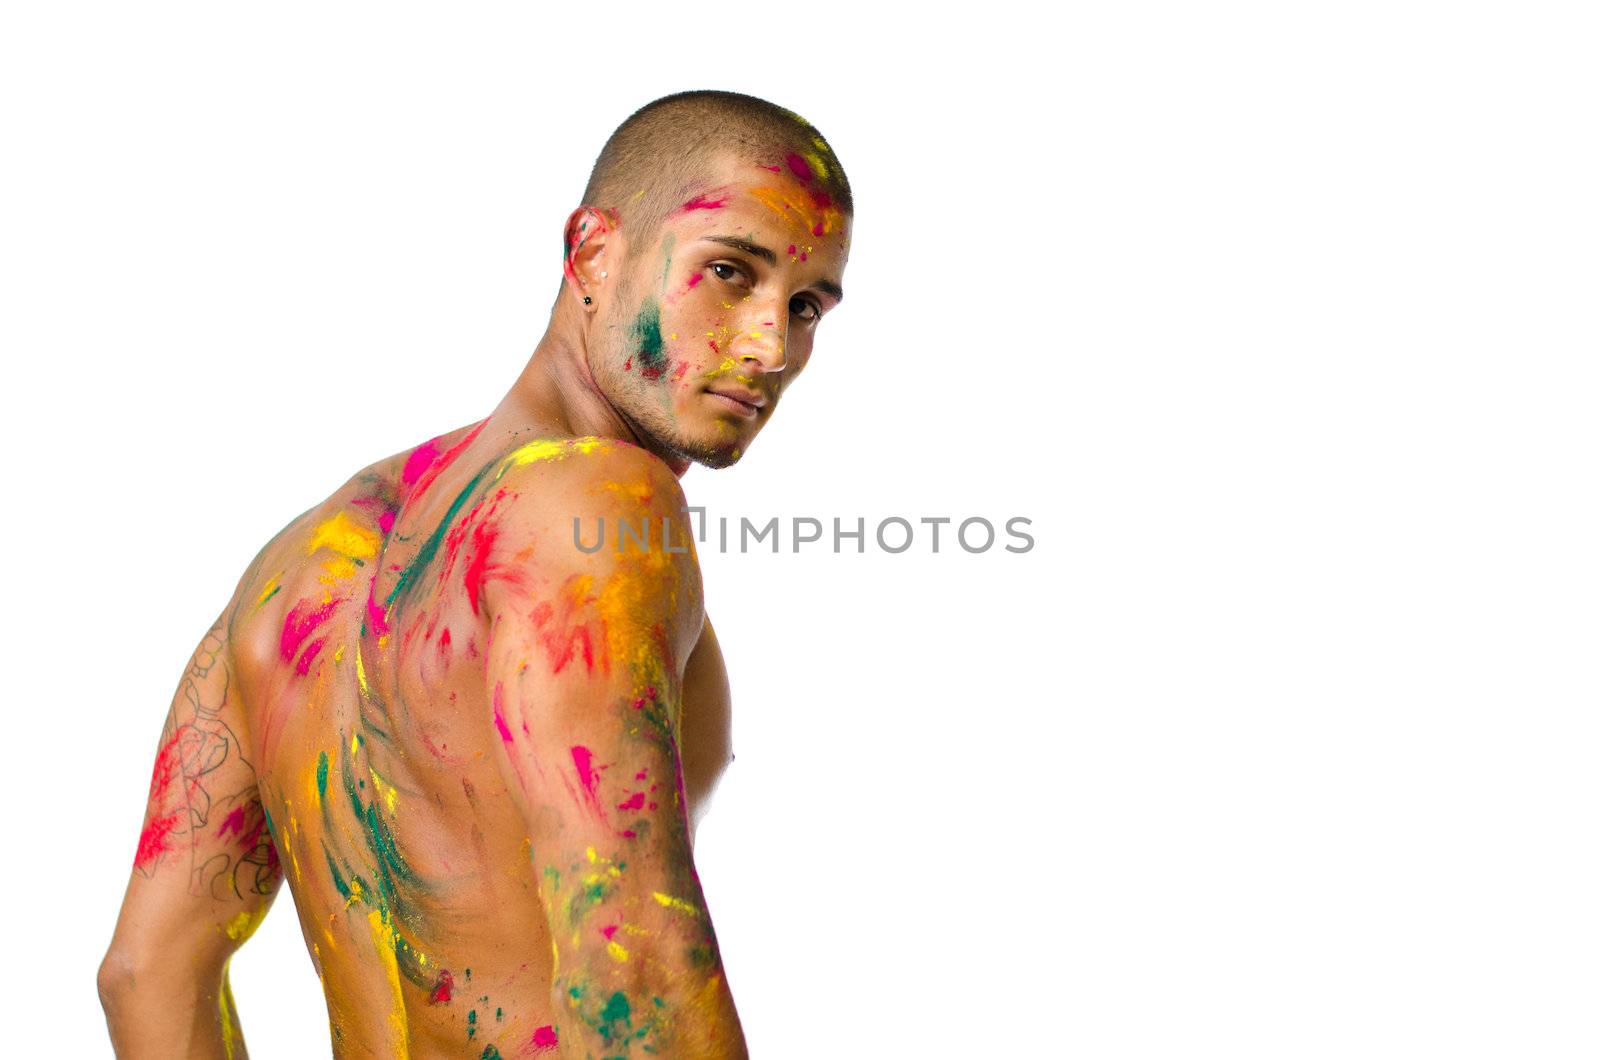 Attractive young man shirtless, skin painted all over with bright colors seen from behind